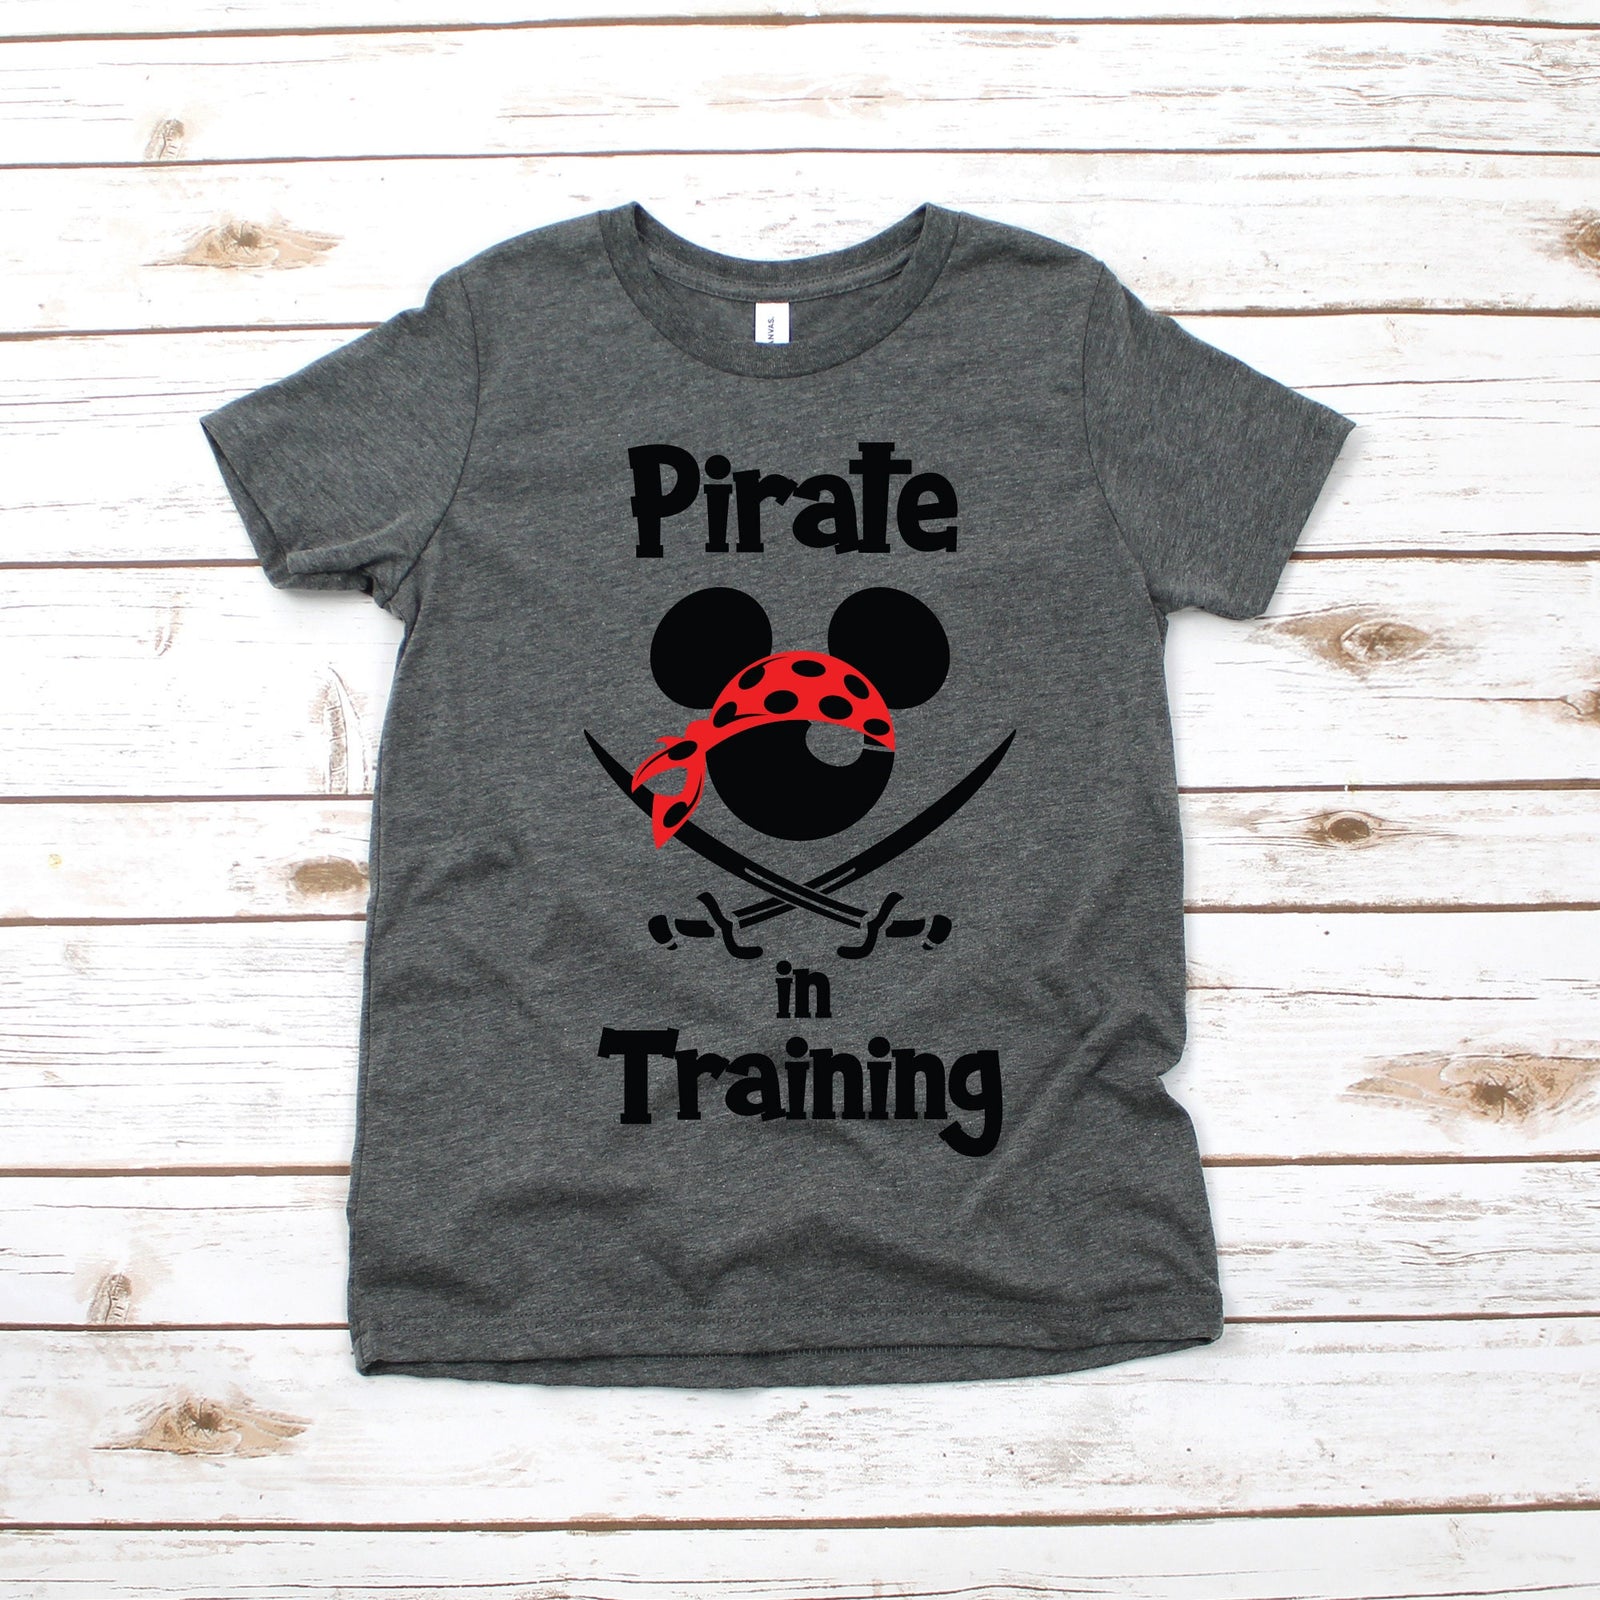 Mickey Pirate Youth T Shirt - In Training - Disney Matching Family Shirts - Ahoy - Pirate's Life - Disney Cruise